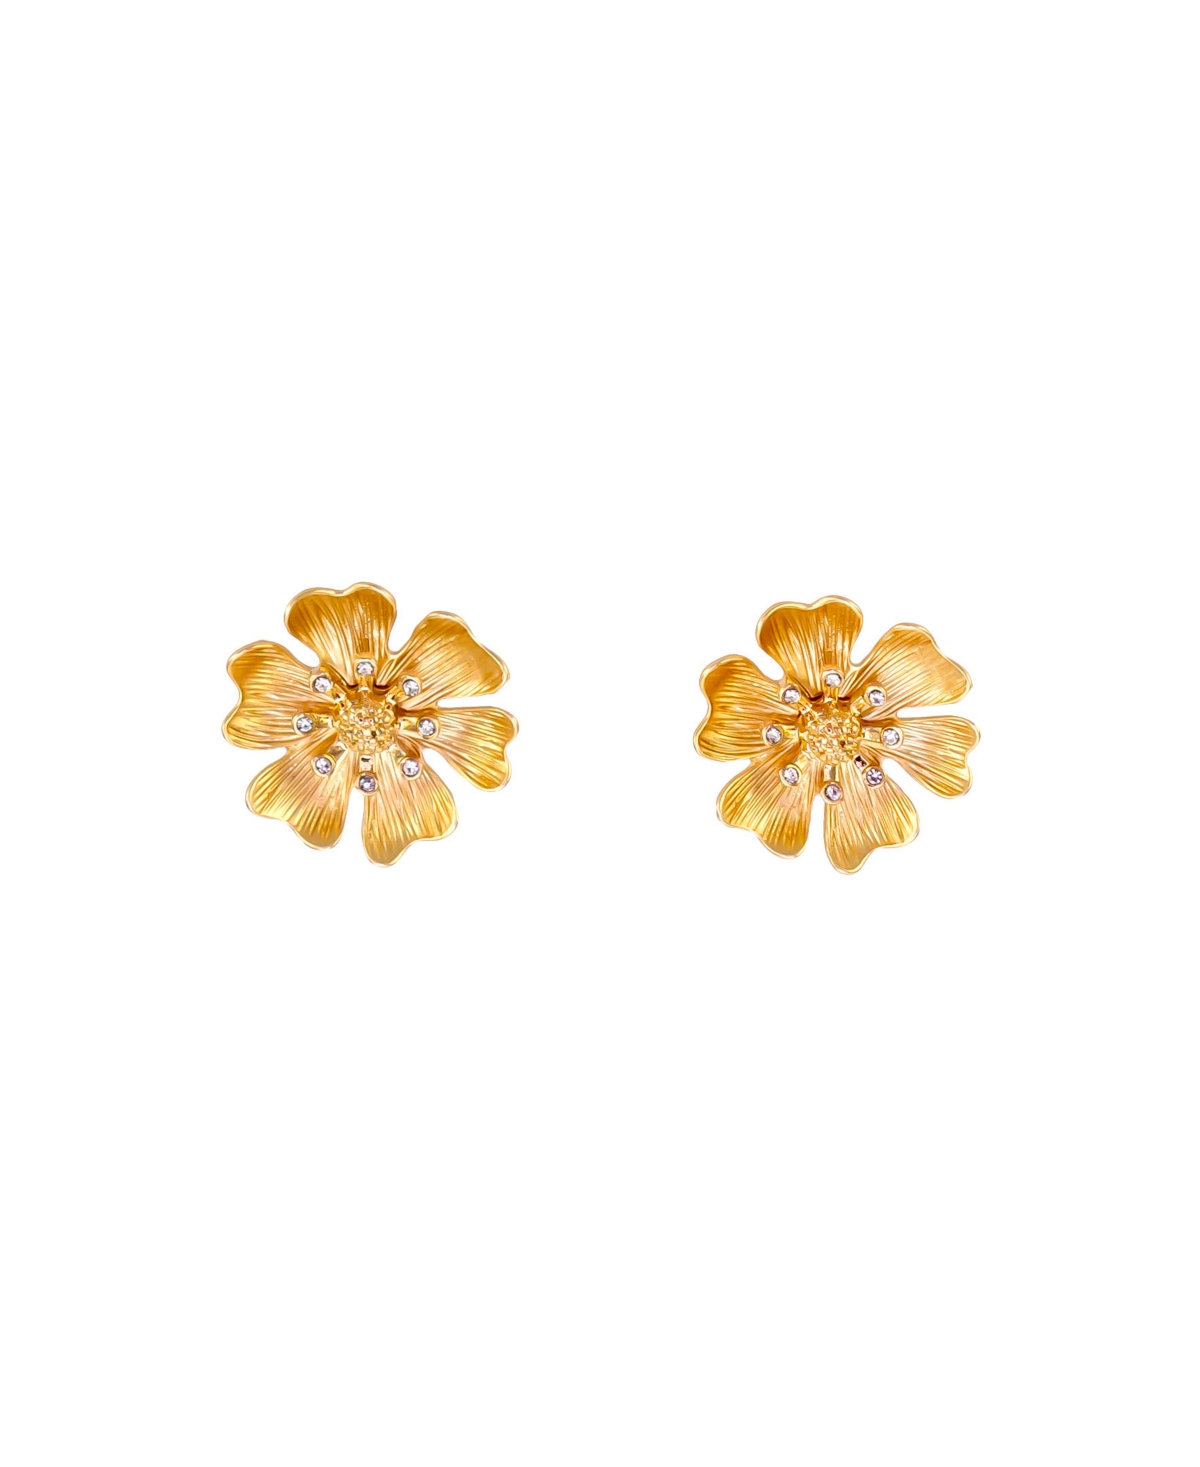 Pierced Earring Flower Button with Stones Earring - Crystal